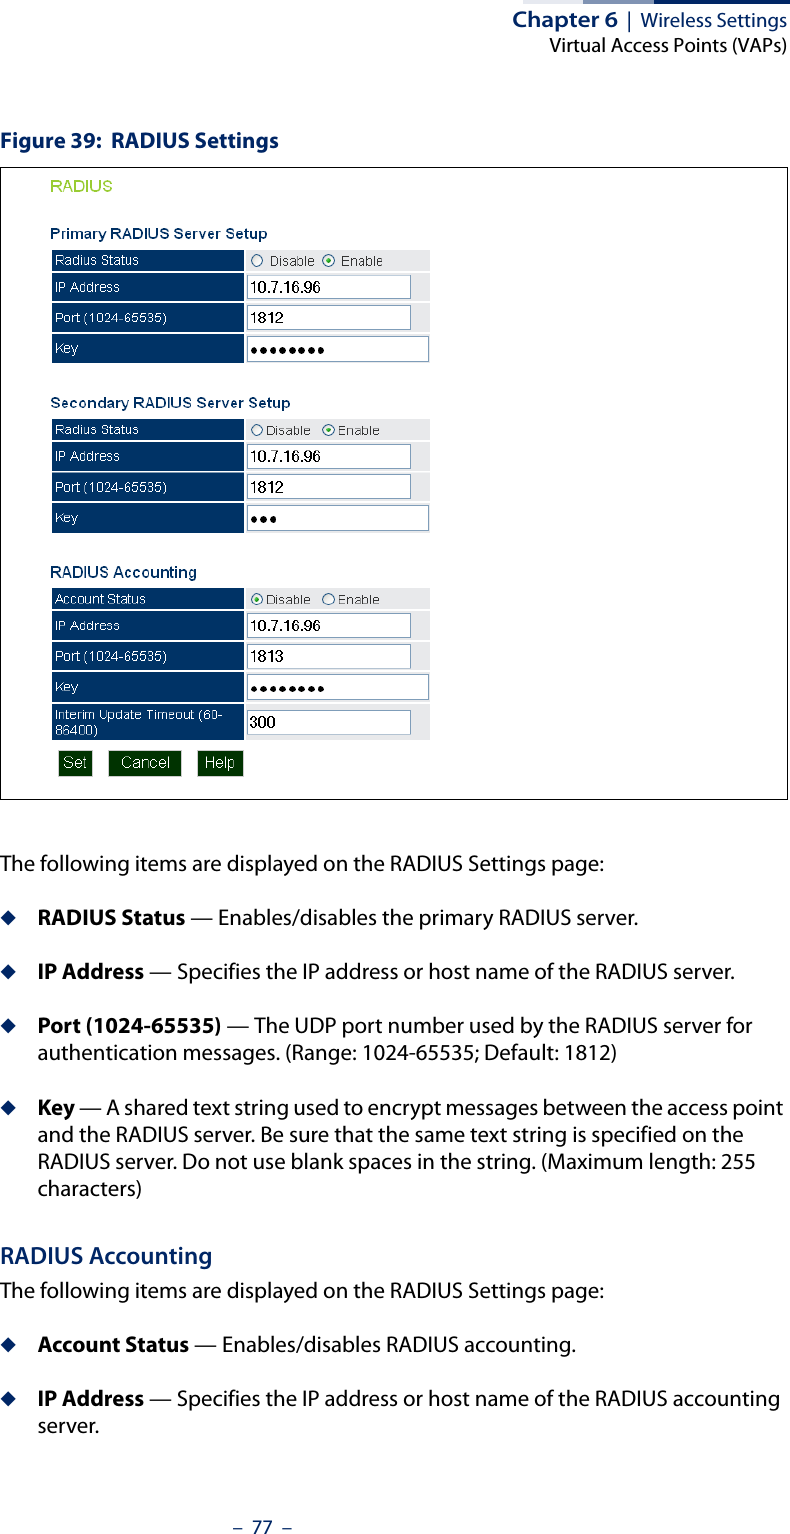 Chapter 6  |  Wireless SettingsVirtual Access Points (VAPs)–  77  –Figure 39:  RADIUS SettingsThe following items are displayed on the RADIUS Settings page:◆RADIUS Status — Enables/disables the primary RADIUS server.◆IP Address — Specifies the IP address or host name of the RADIUS server.◆Port (1024-65535) — The UDP port number used by the RADIUS server for authentication messages. (Range: 1024-65535; Default: 1812)◆Key — A shared text string used to encrypt messages between the access point and the RADIUS server. Be sure that the same text string is specified on the RADIUS server. Do not use blank spaces in the string. (Maximum length: 255 characters)RADIUS AccountingThe following items are displayed on the RADIUS Settings page:◆Account Status — Enables/disables RADIUS accounting.◆IP Address — Specifies the IP address or host name of the RADIUS accounting server.